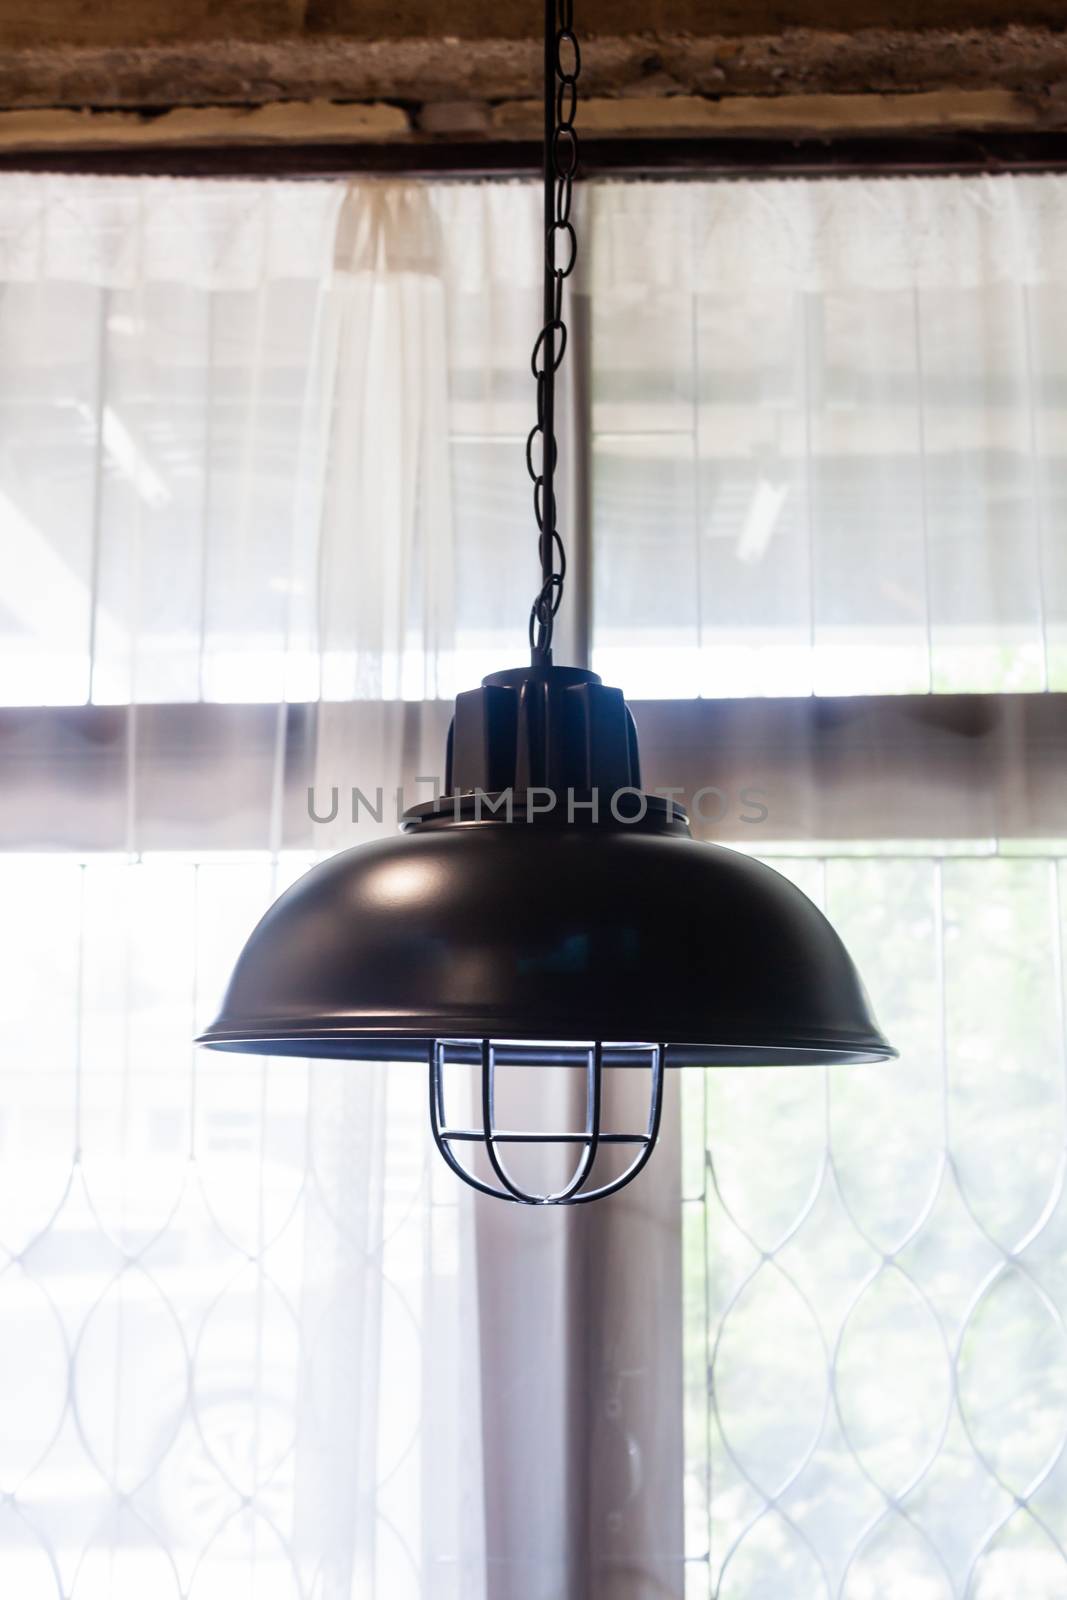 Lamps in a modern cafe by punsayaporn